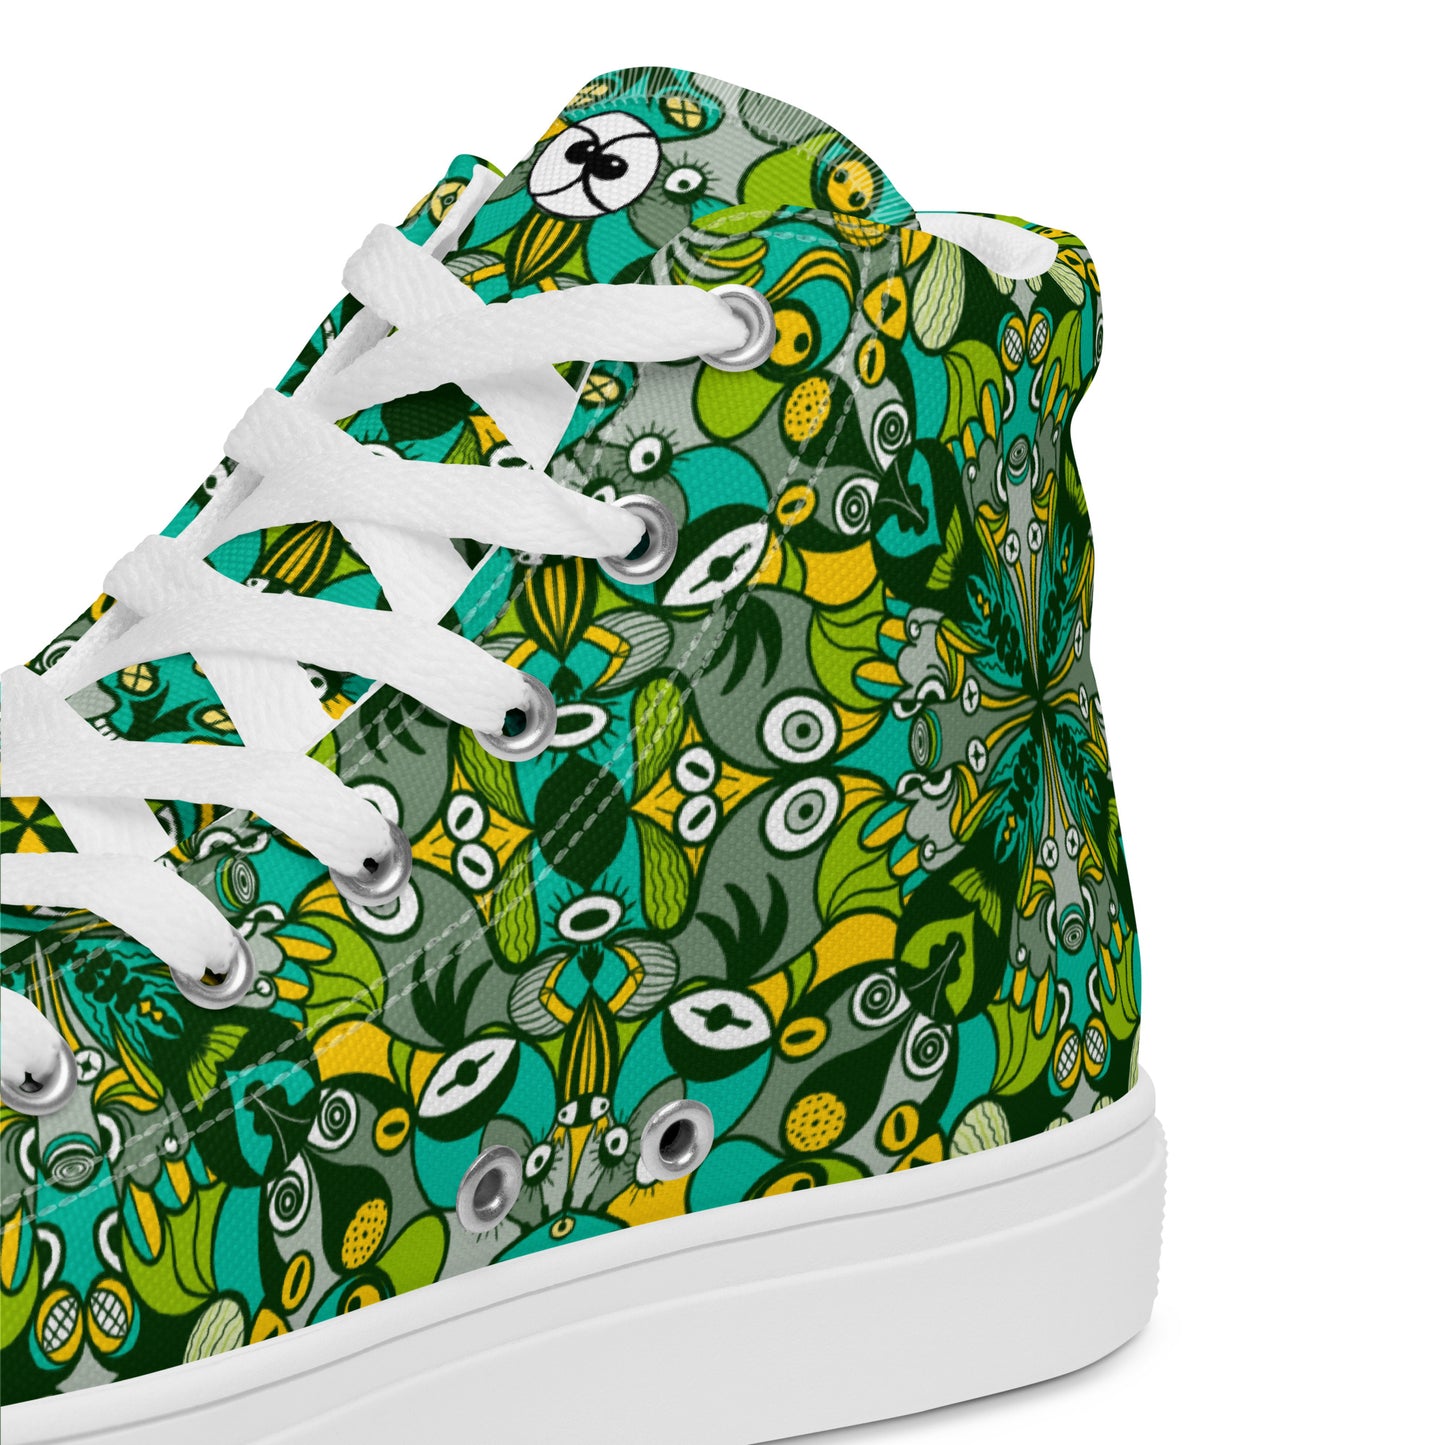 Join the funniest alien doodling network in the universe Men’s high top canvas shoes. Product detail